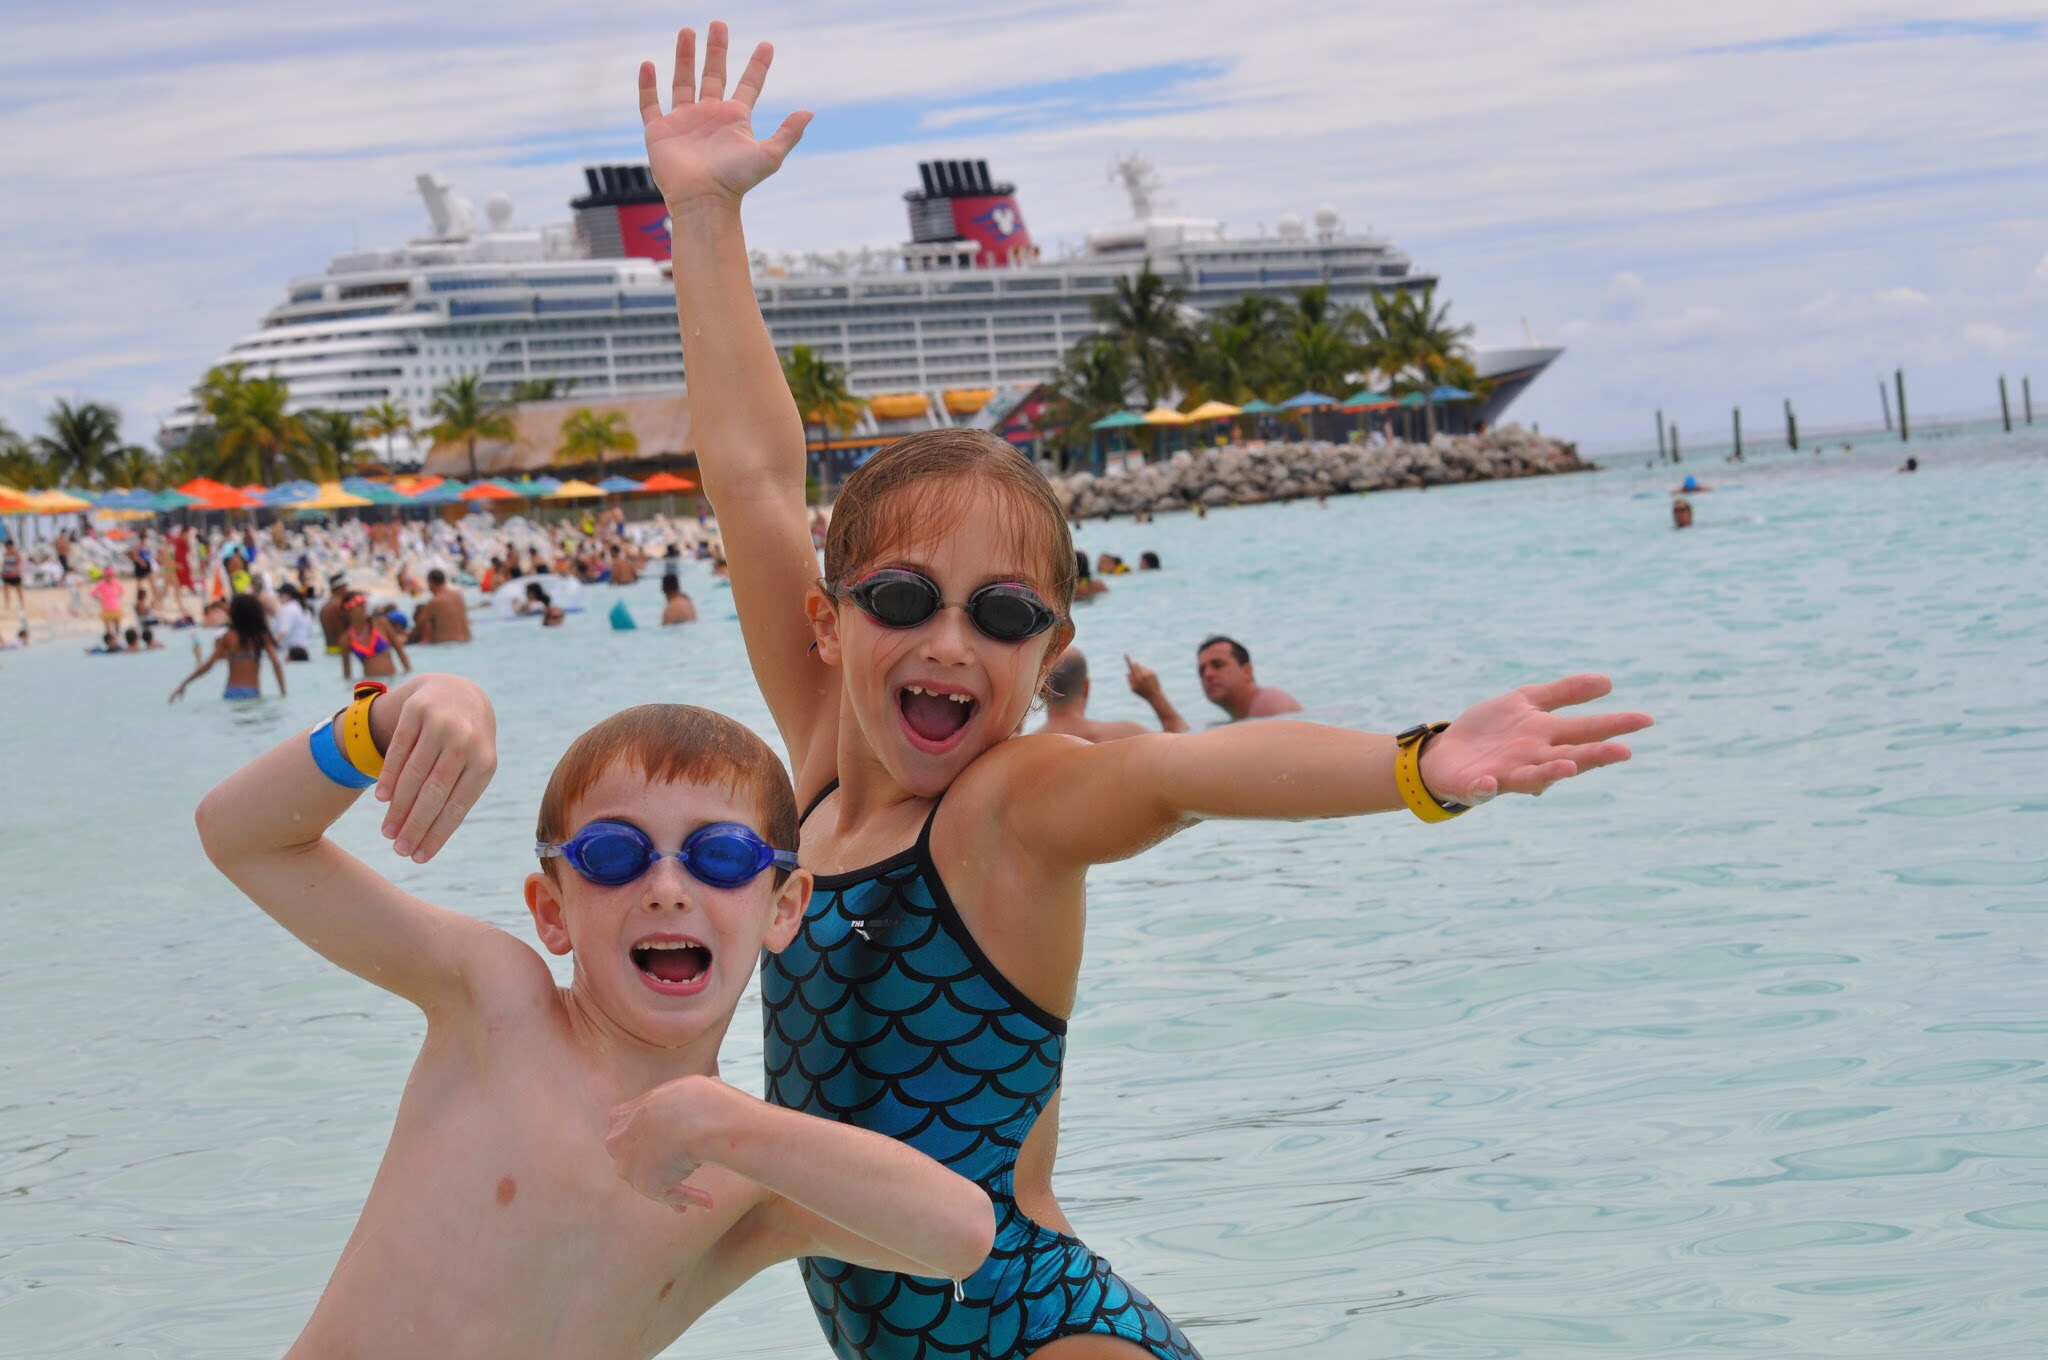 Post a #CruiseSmile Photo Daily for a Chance to Win a Free Cruise